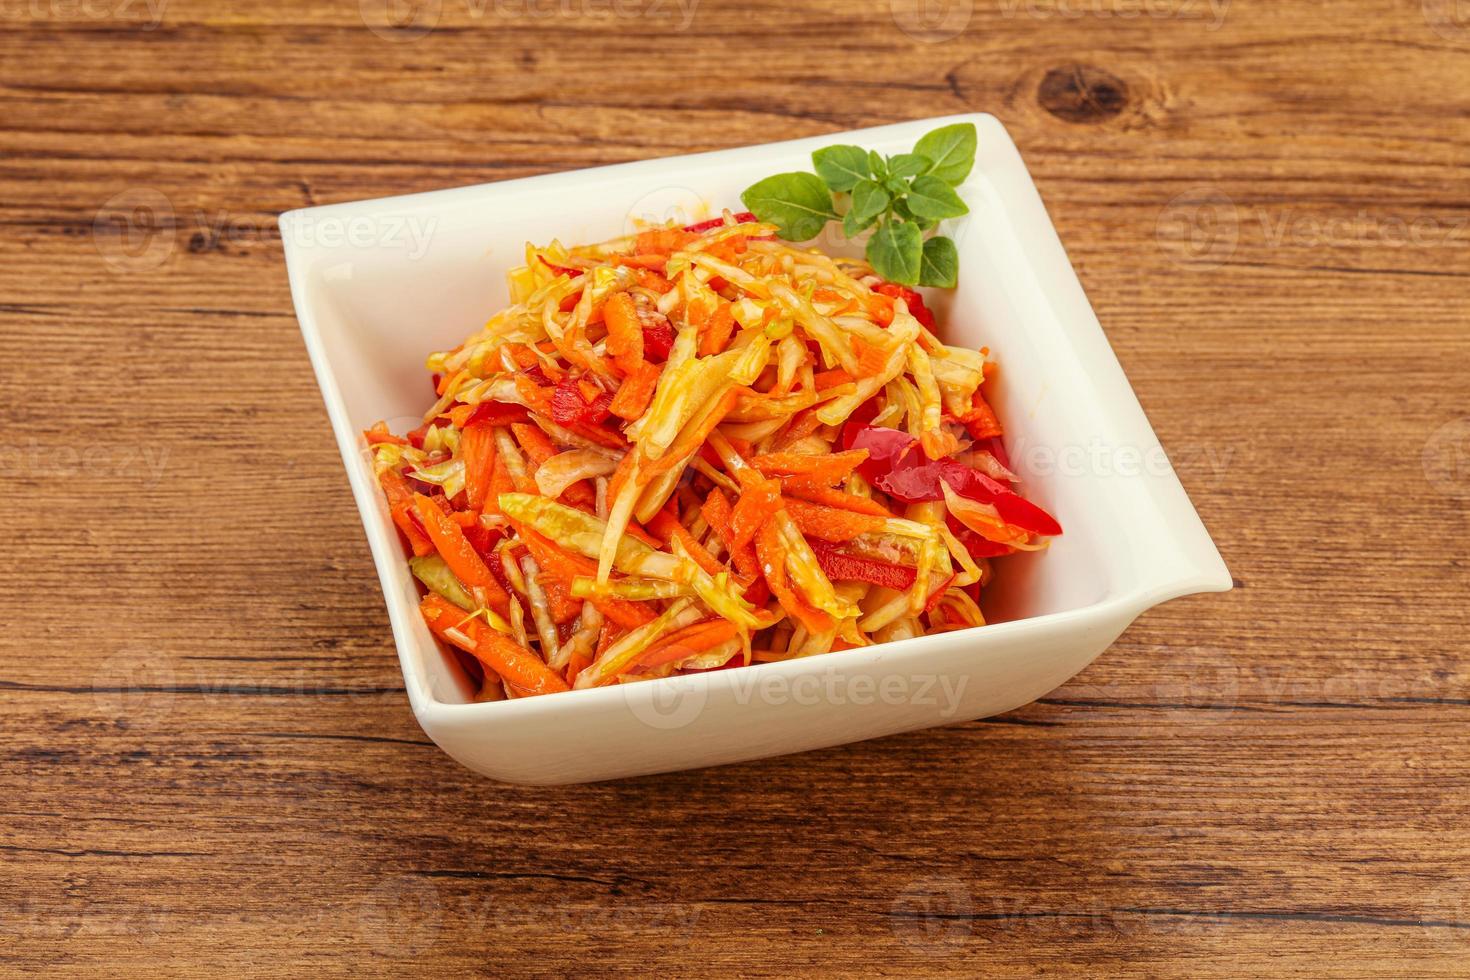 Cabbage salad with carrot and pepper photo